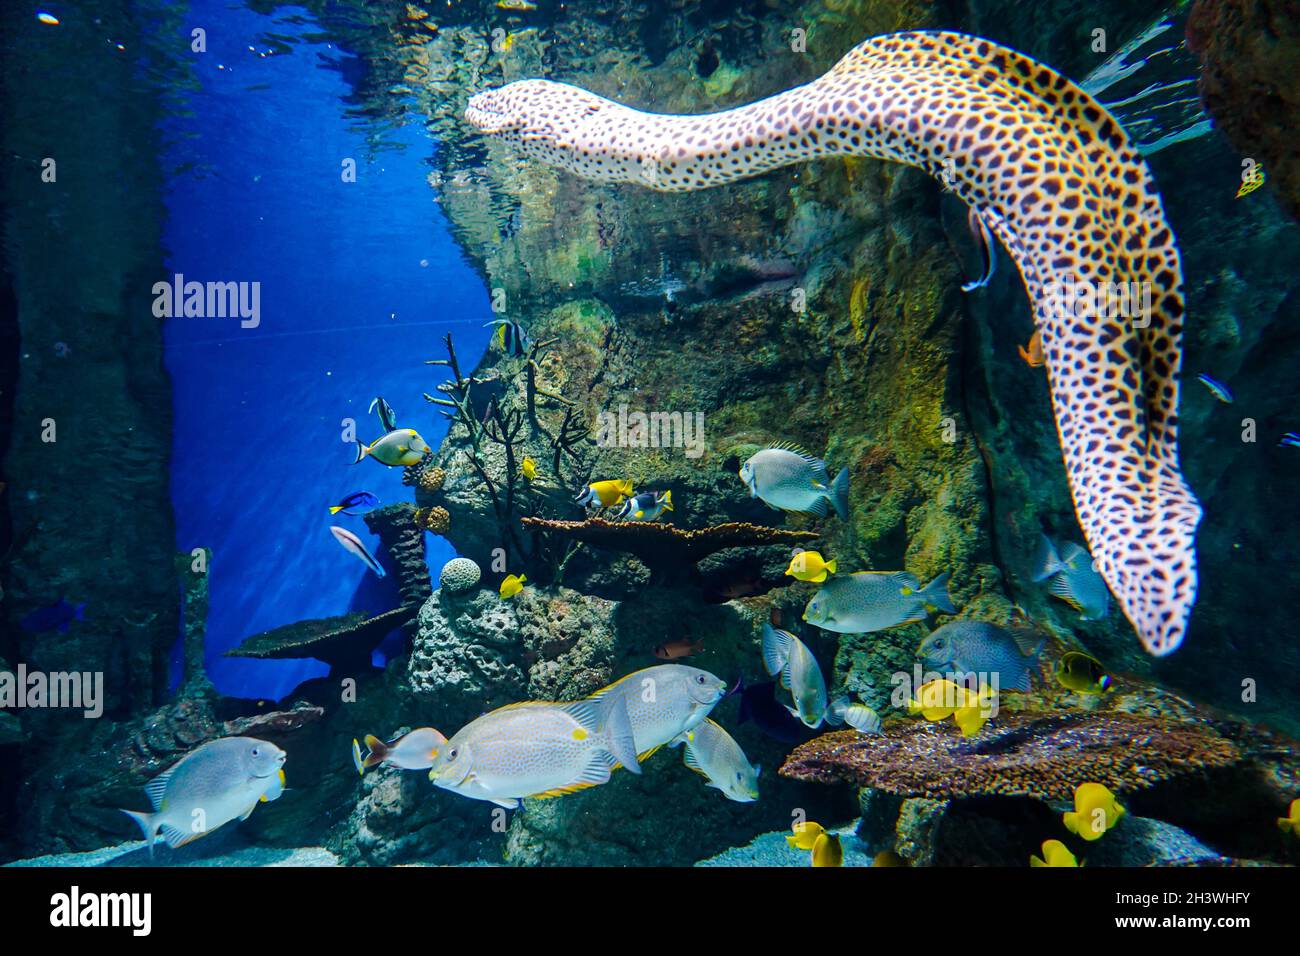 Wonderful aquatic fauna with colorful fish, corals and a leopard eel Stock Photo